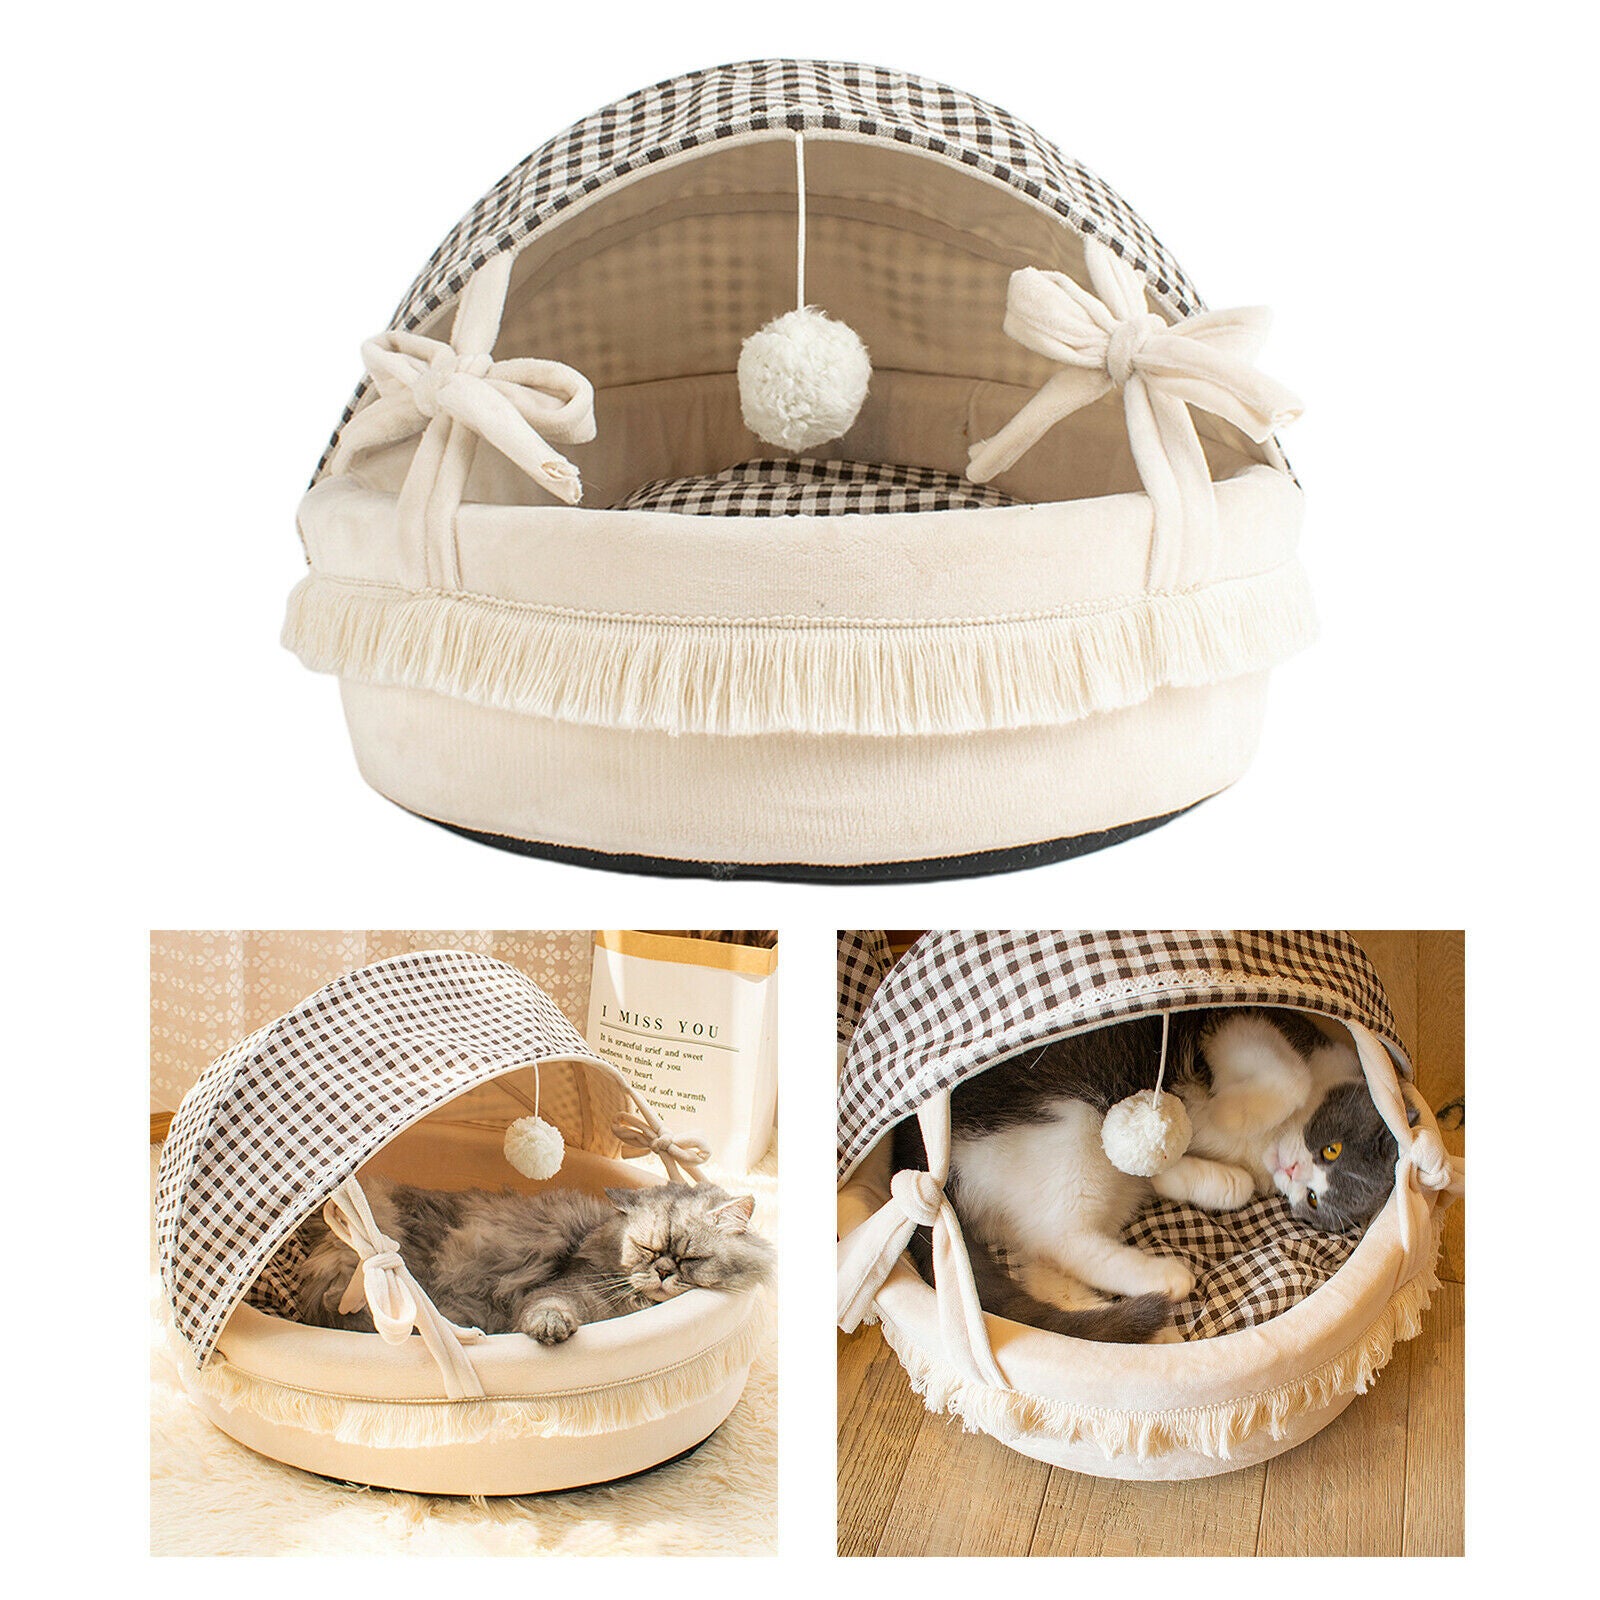 Pet Nest Bed Thick Soft Plush with Foldable Cover Cat House for Small Dogs